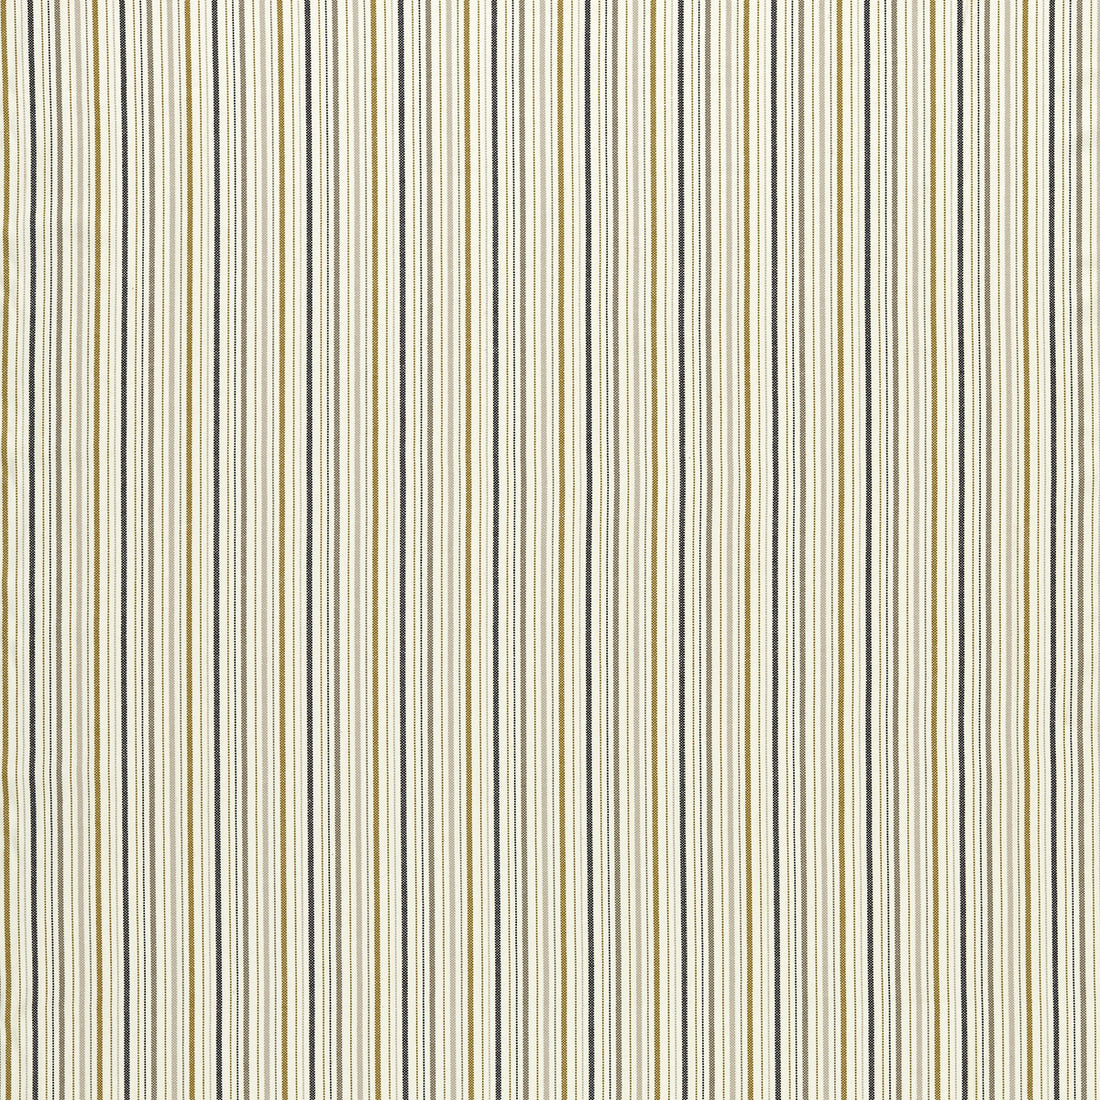 Maryland fabric in ochre/charcoal color - pattern F1501/03.CAC.0 - by Clarke And Clarke in the Clarke &amp; Clarke Edgeworth collection